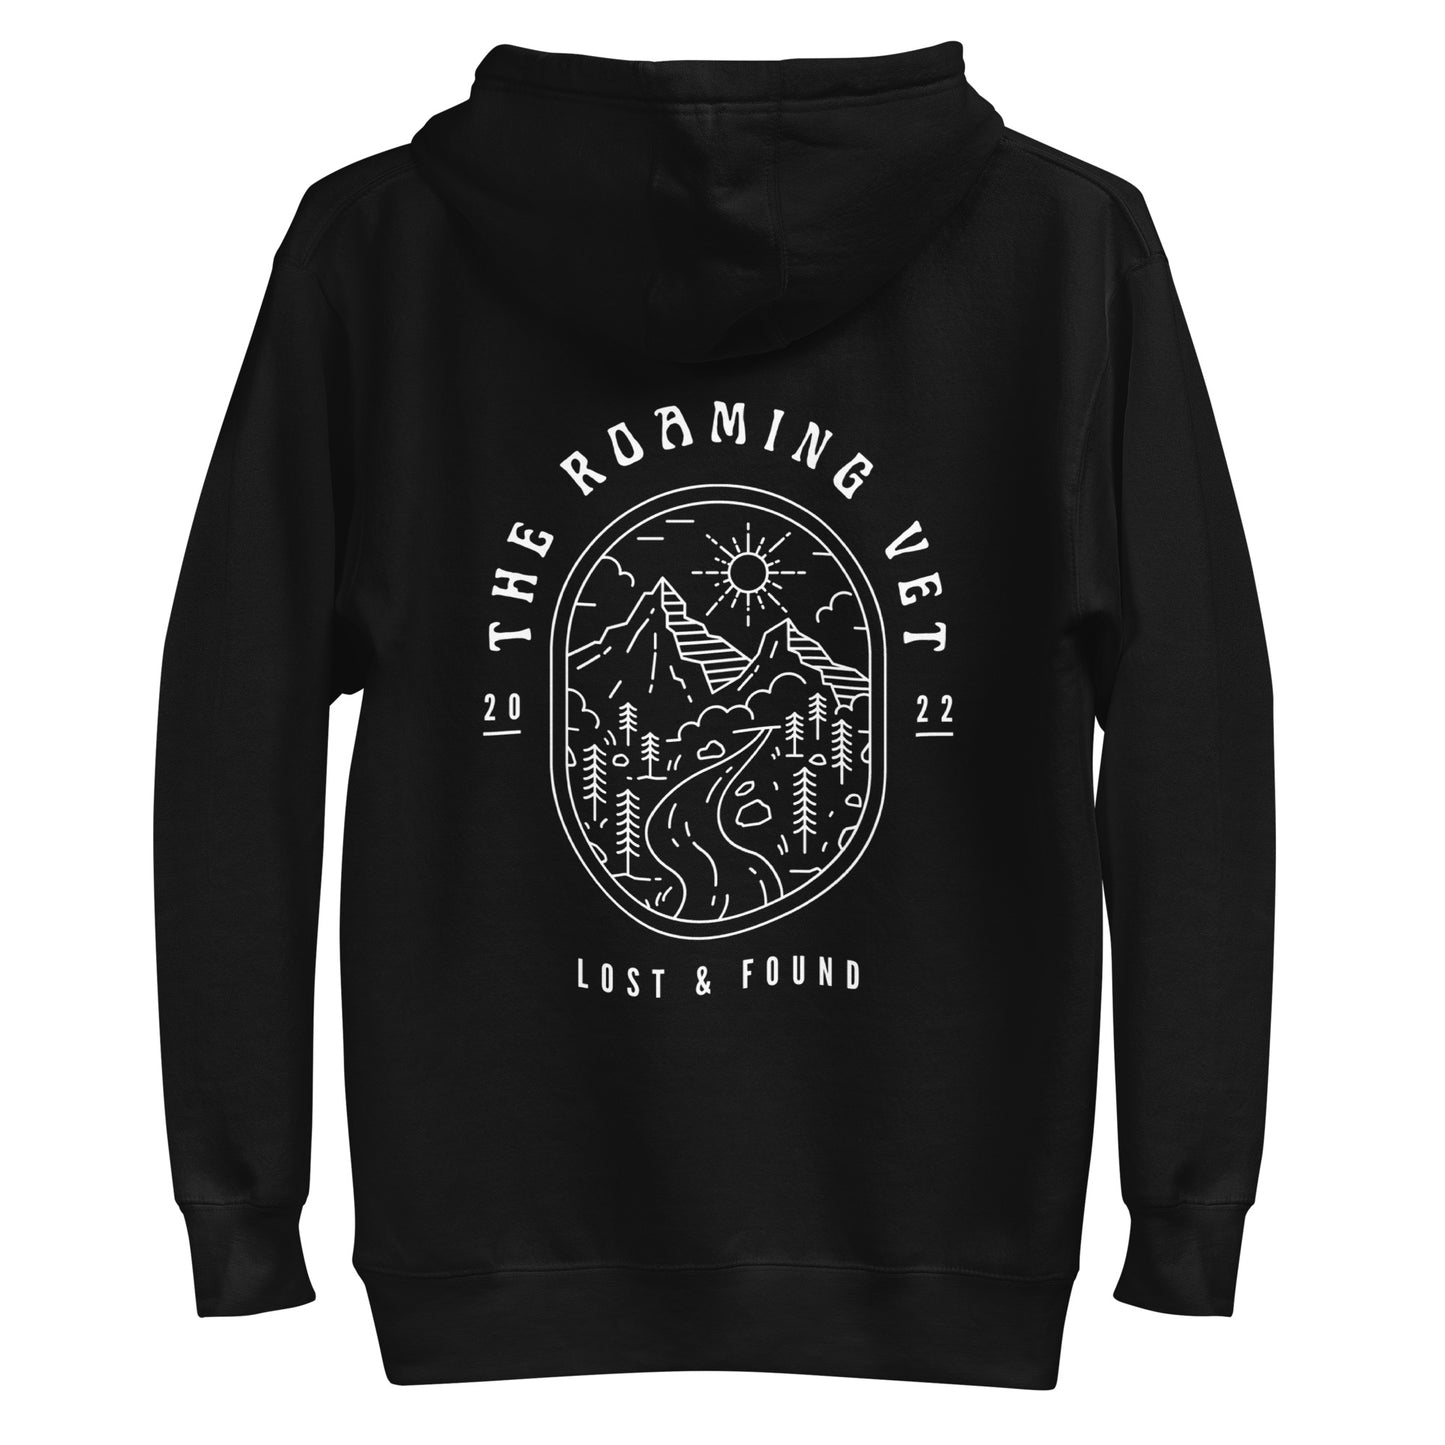 The Roaming Vet Unisex Hoodie with Back Graphic